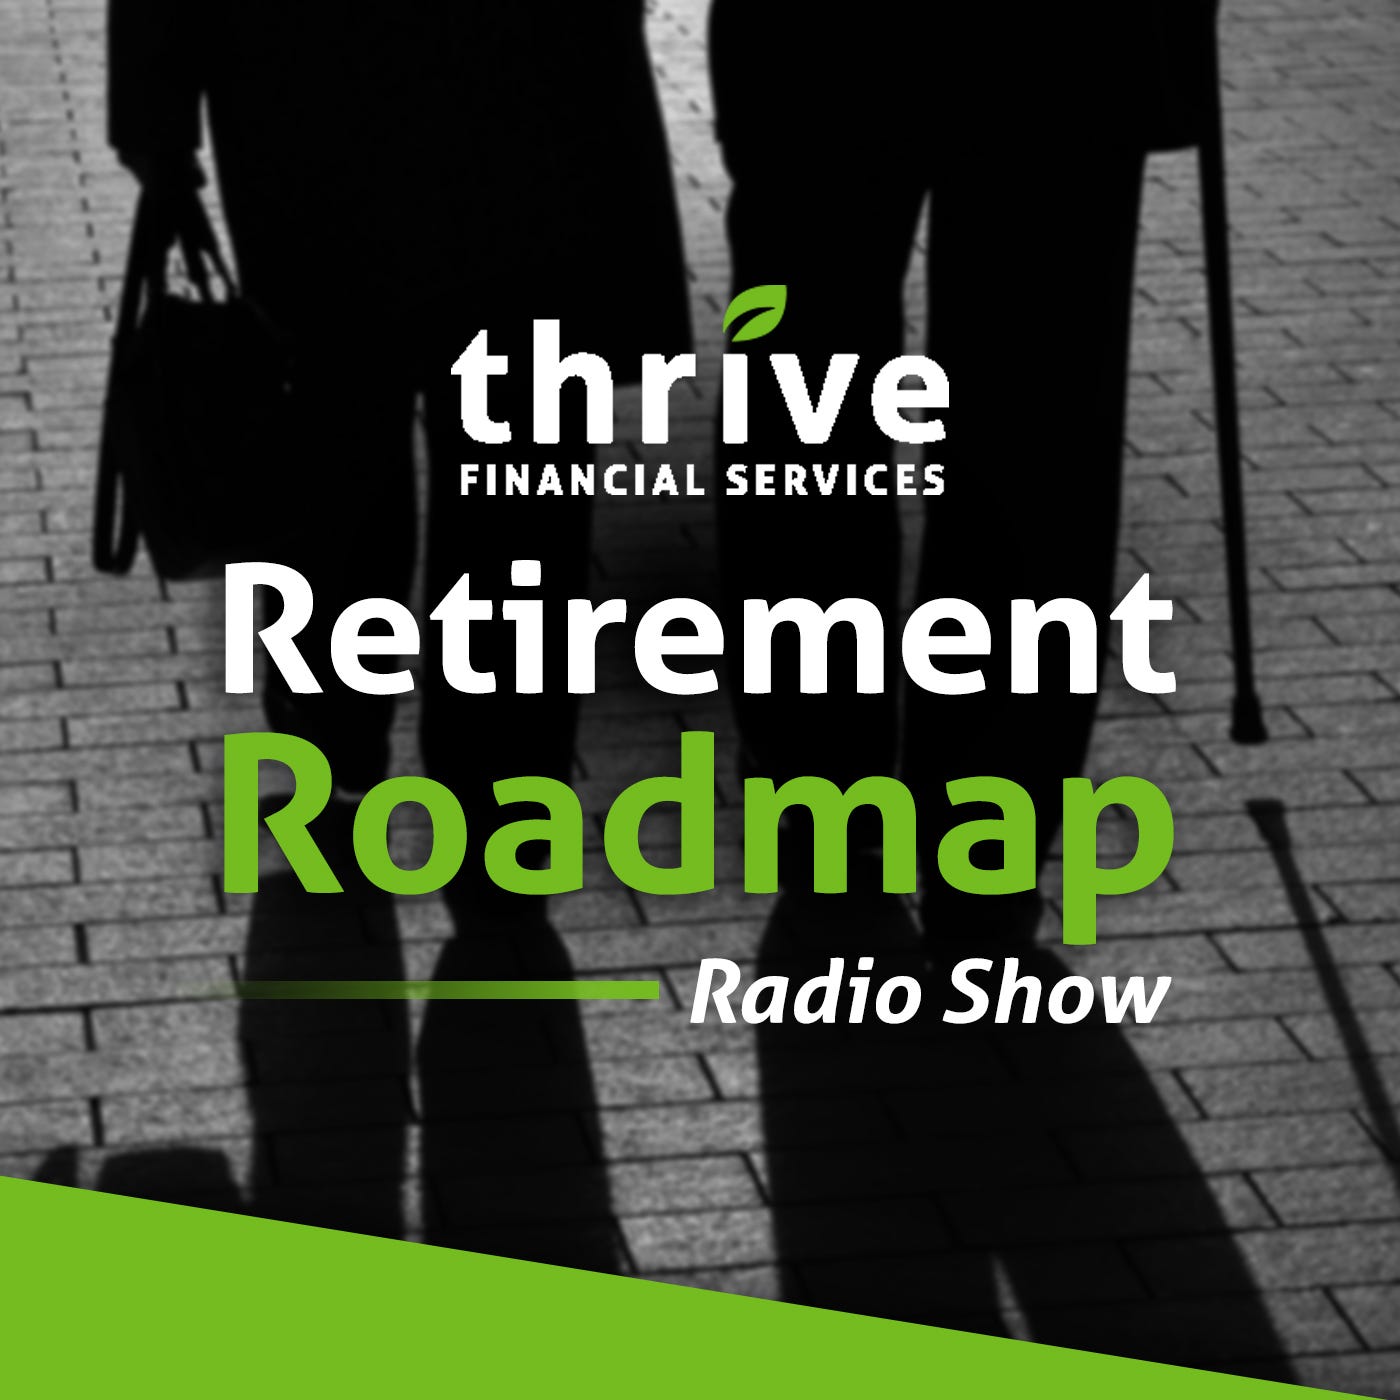 March 7, 2020 | Thrive Financial